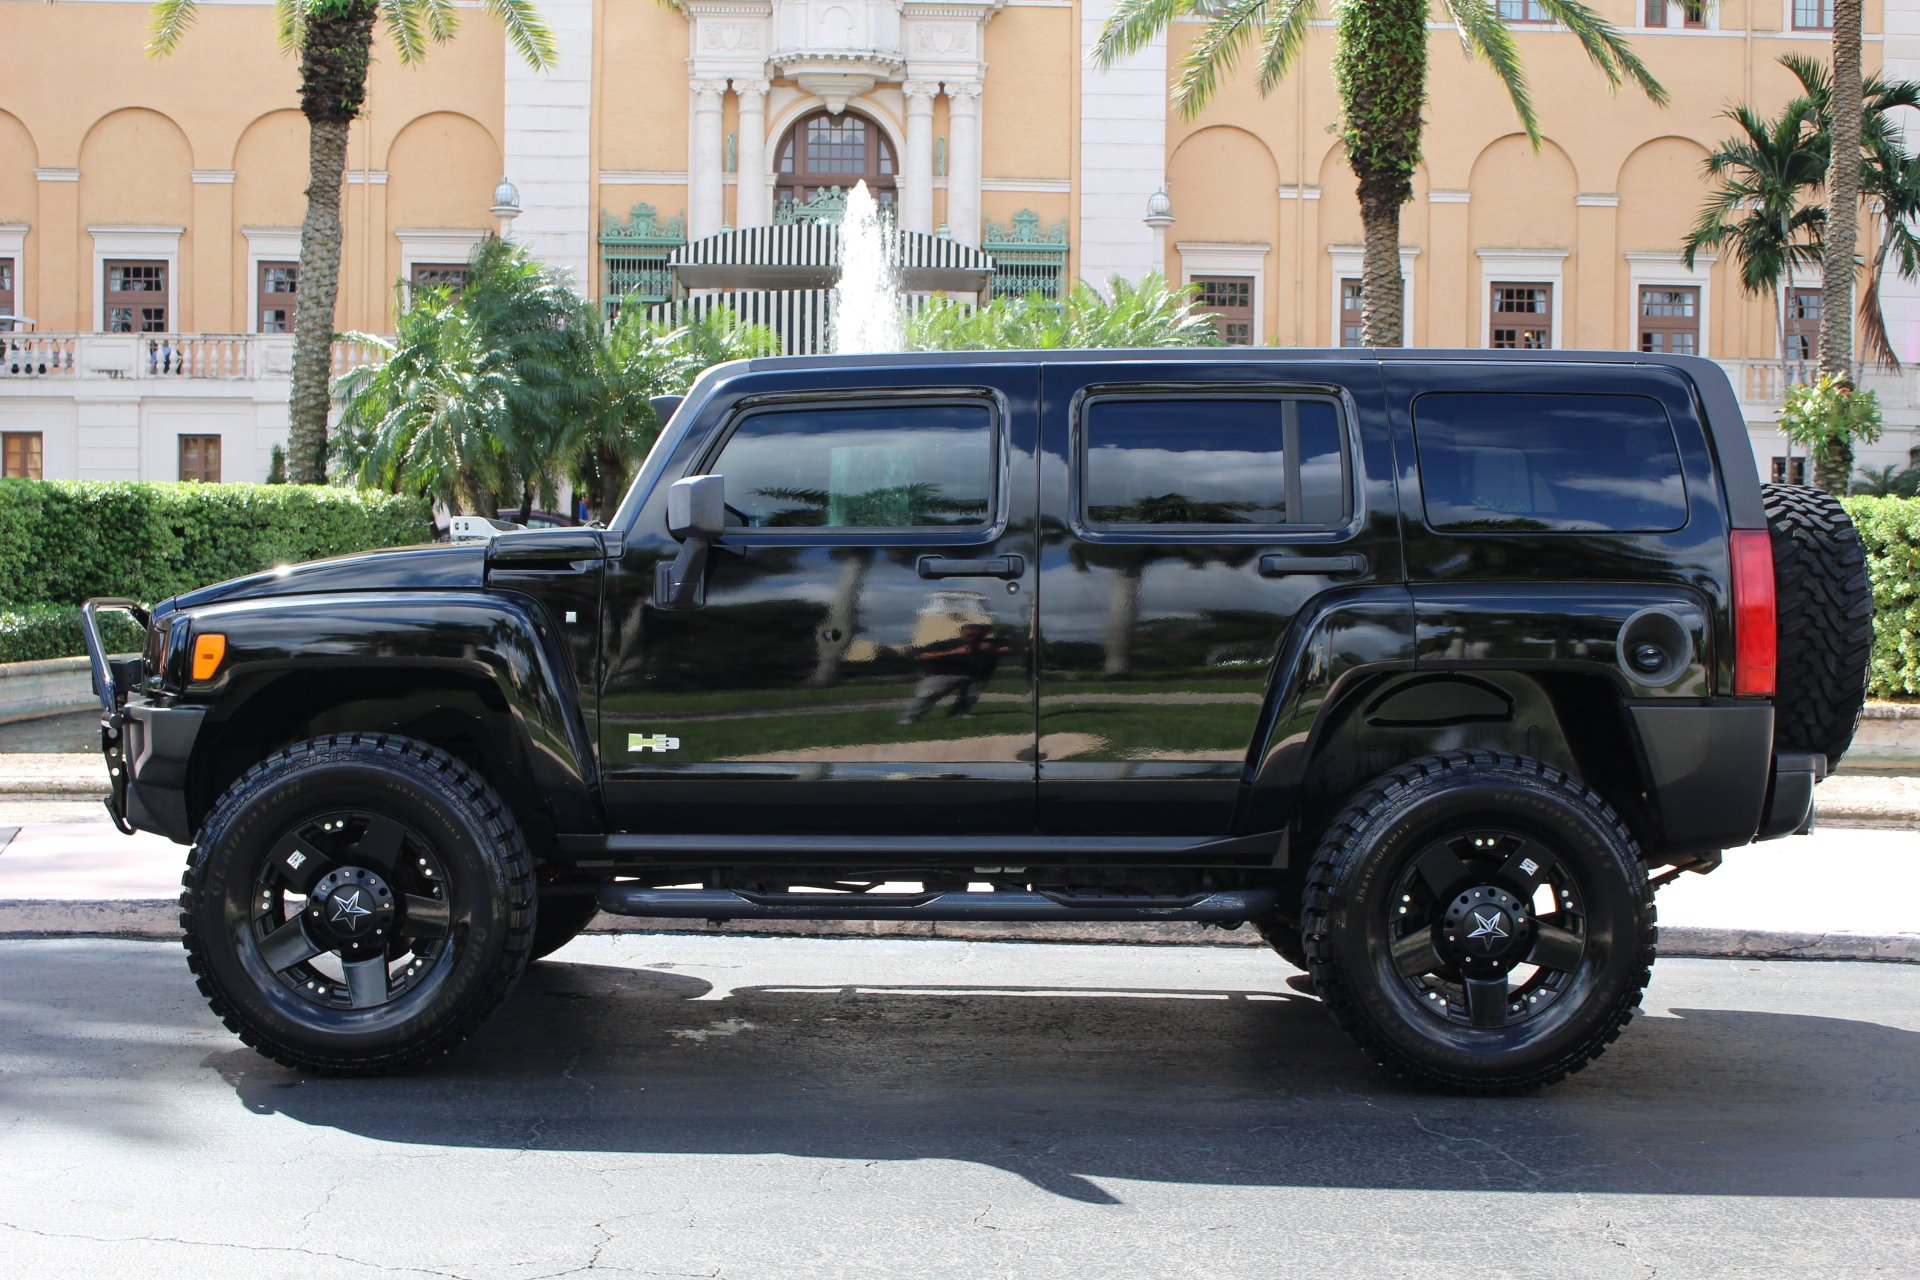 Used 2007 HUMMER H3 Adventure for sale Sold at The Gables Sports Cars in Miami FL 33146 2